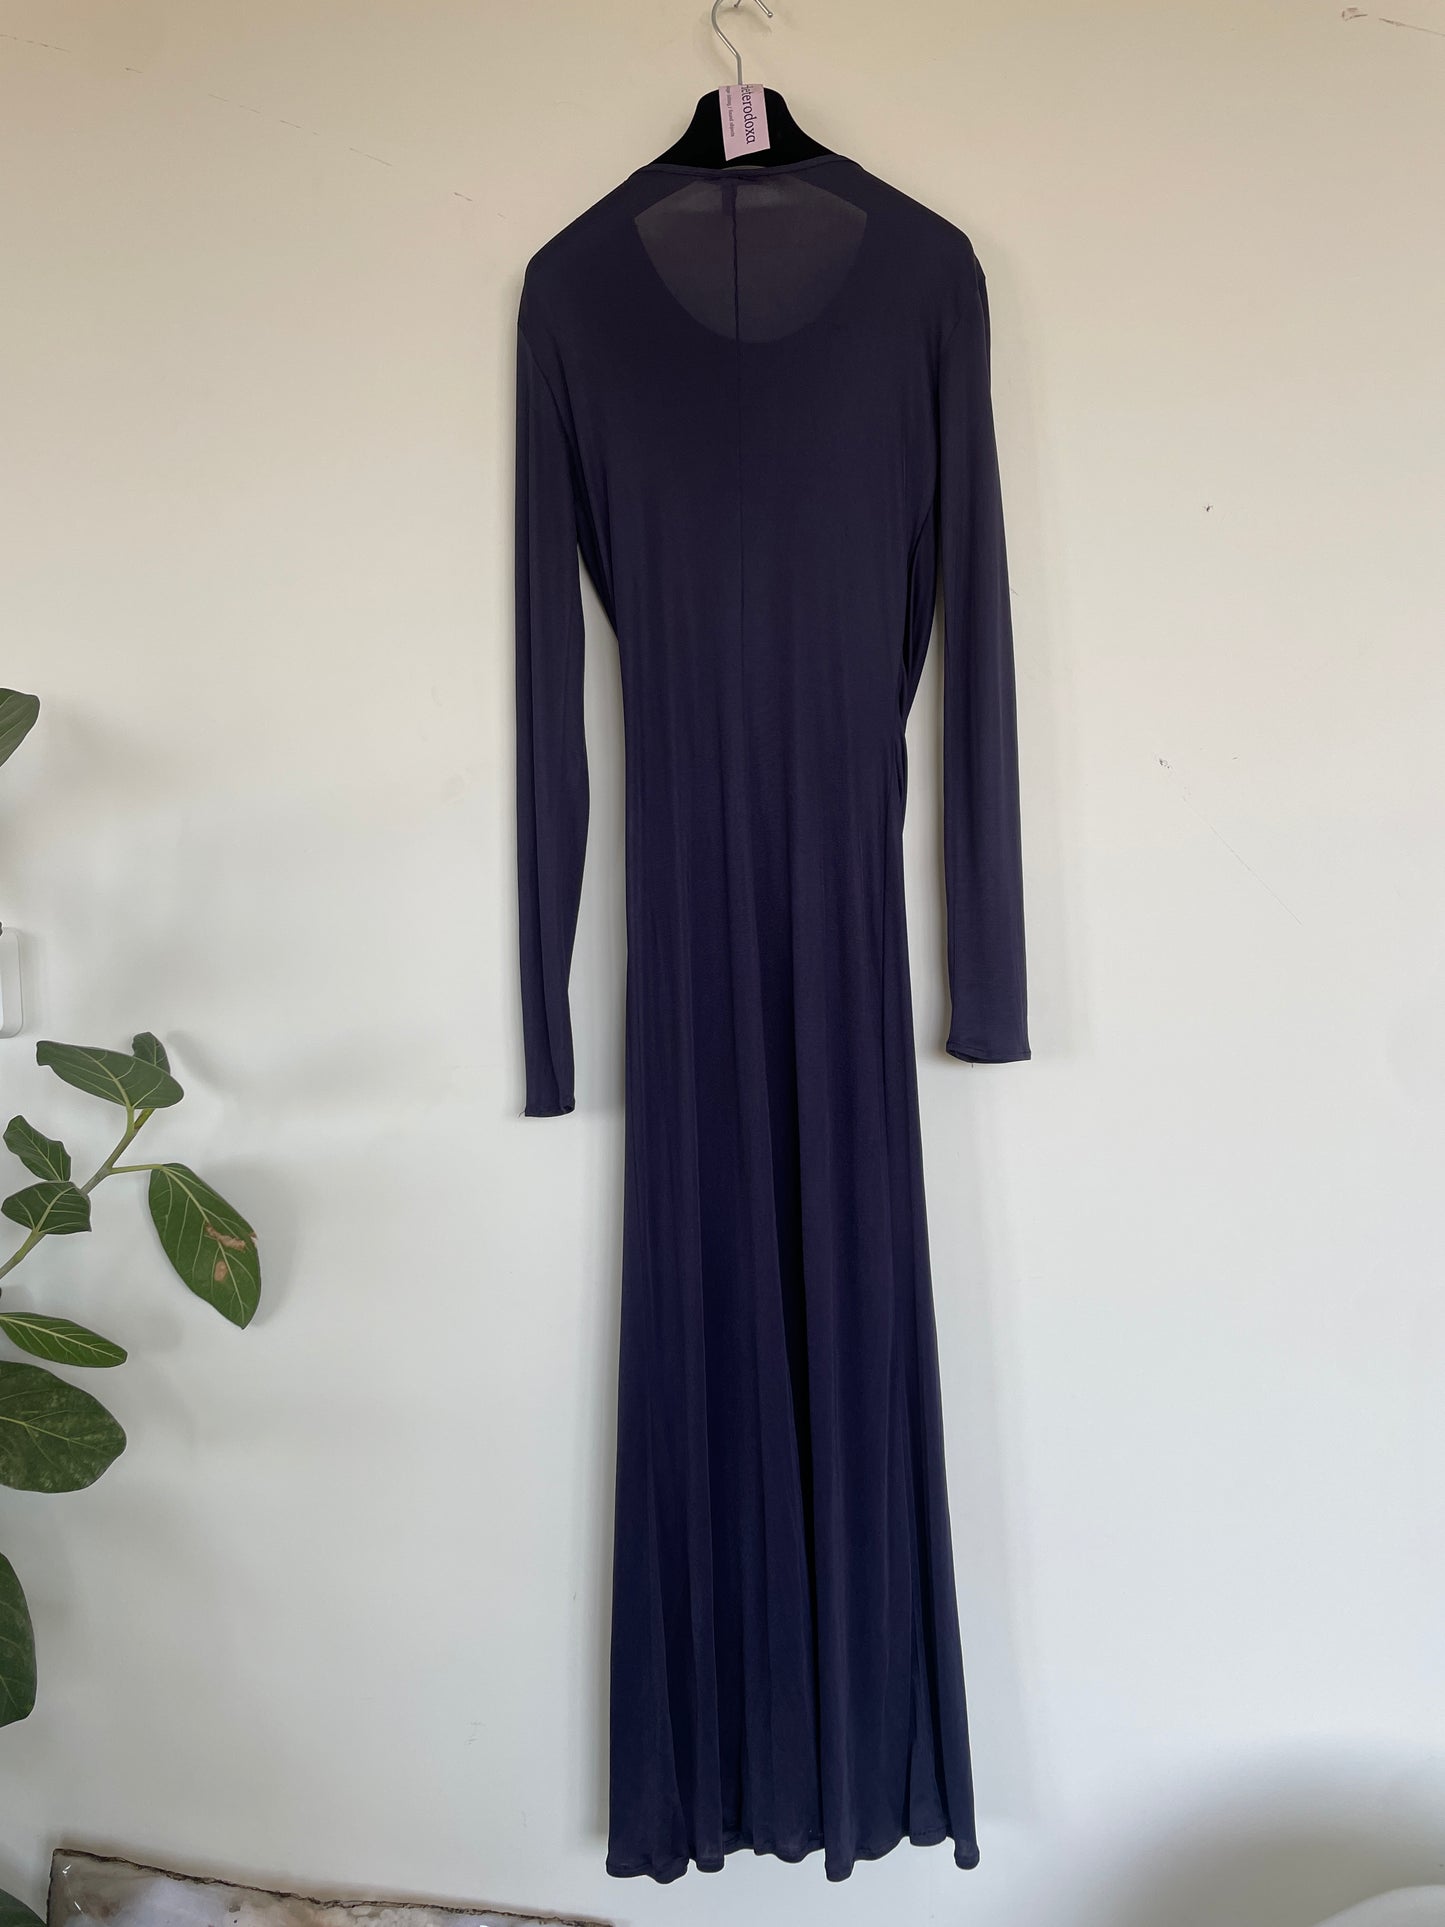 Helmut Lang 90's blue sheer evening dress with crossed frontal draping